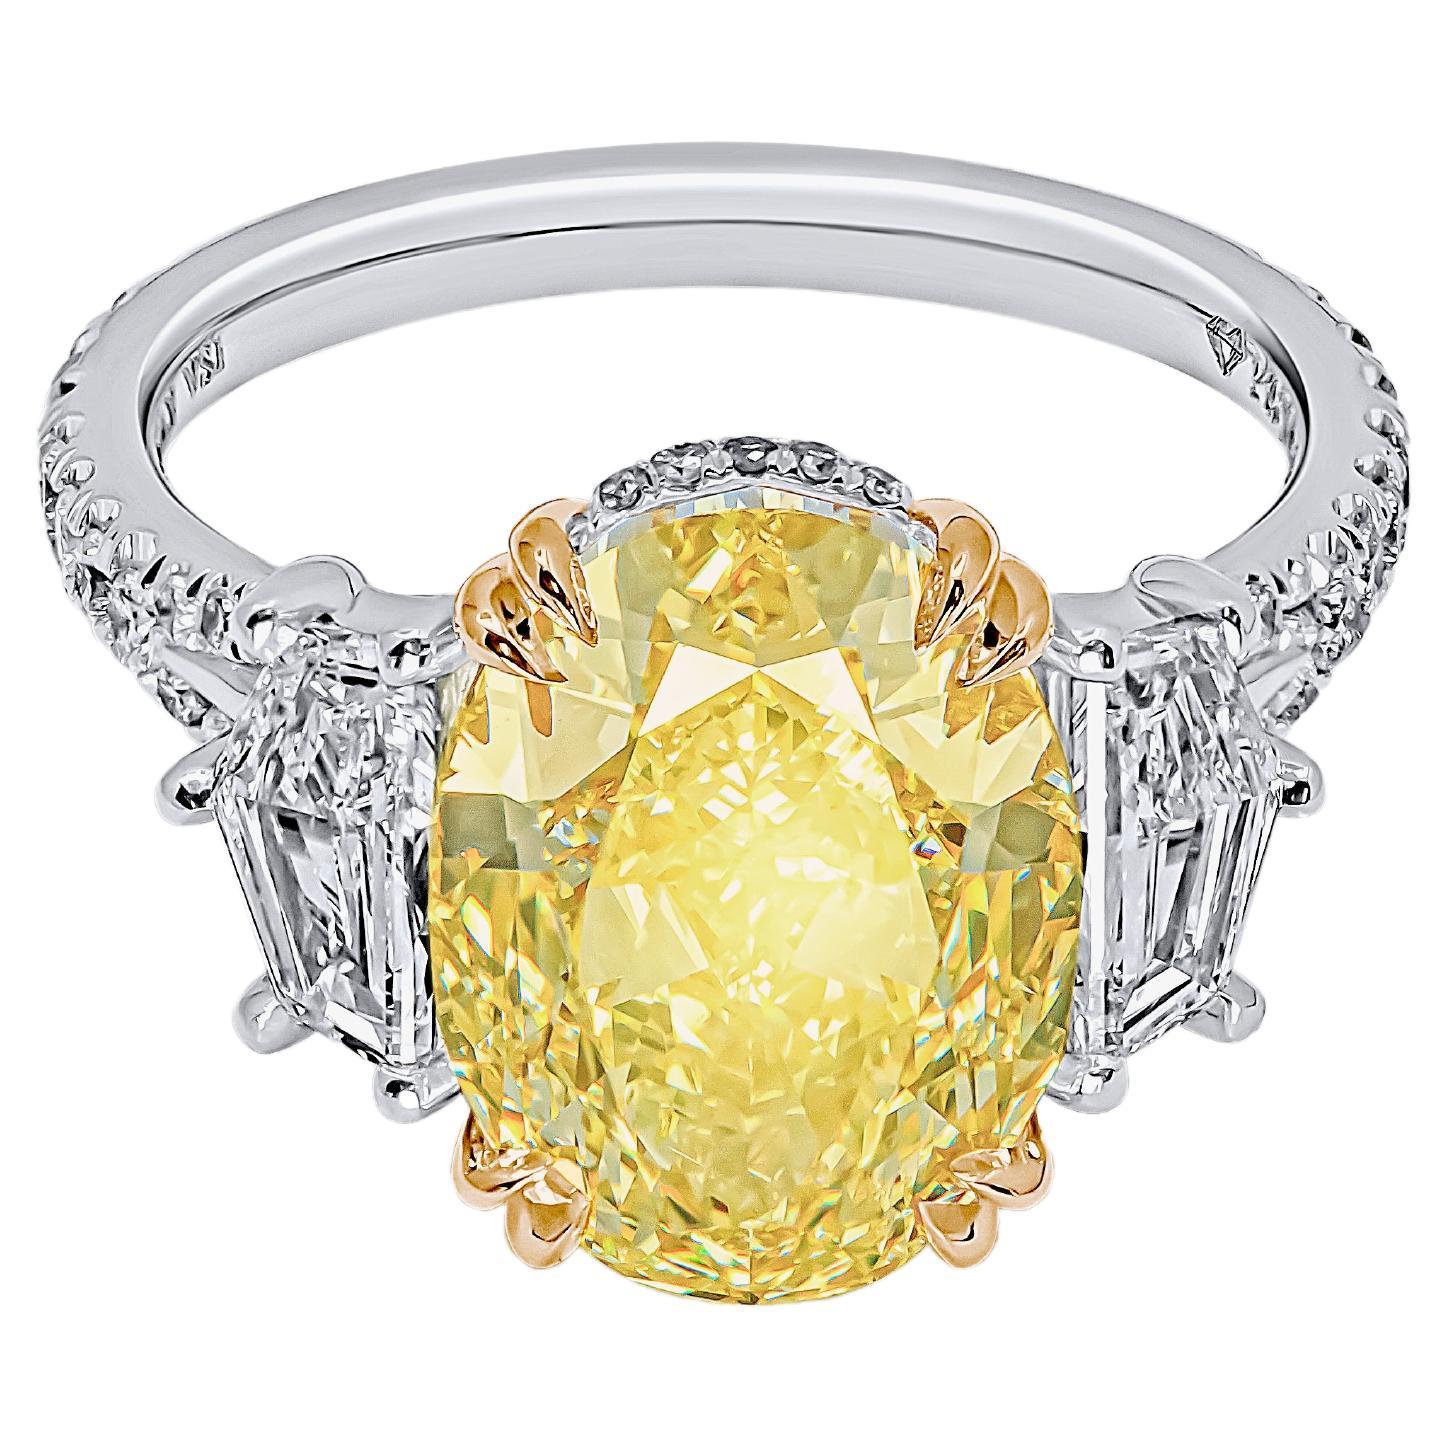 GIA Certified 3 Stone Ring with 5.52ct Fancy Yellow  VS1  Oval Diamond